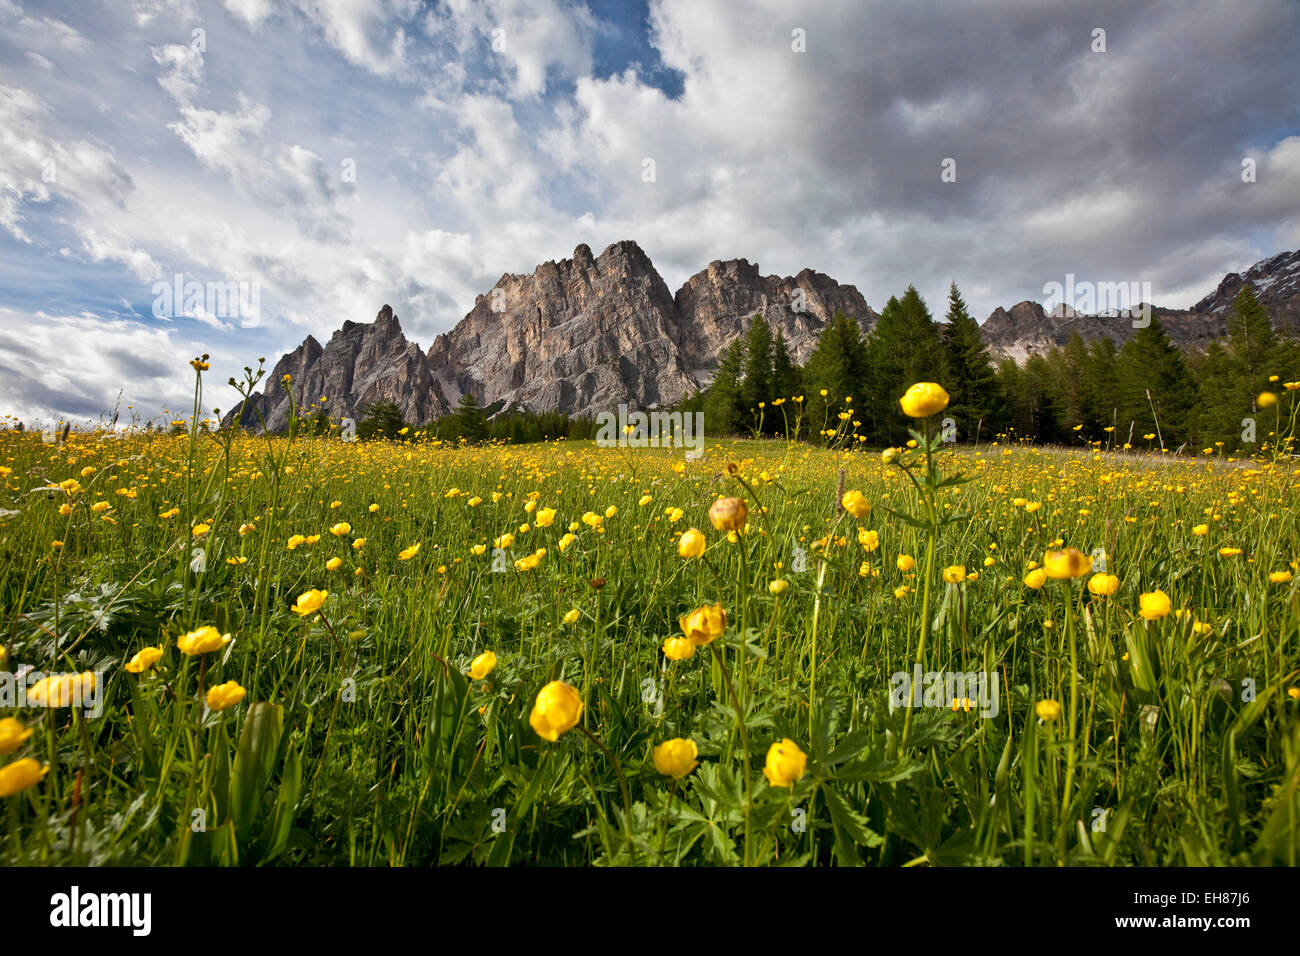 Globe-flowers (trollius europaeus) blooming at the foot of a massif in the Dolomites by Cortina D'Ampezzo, Veneto, Italy, Europe Stock Photo